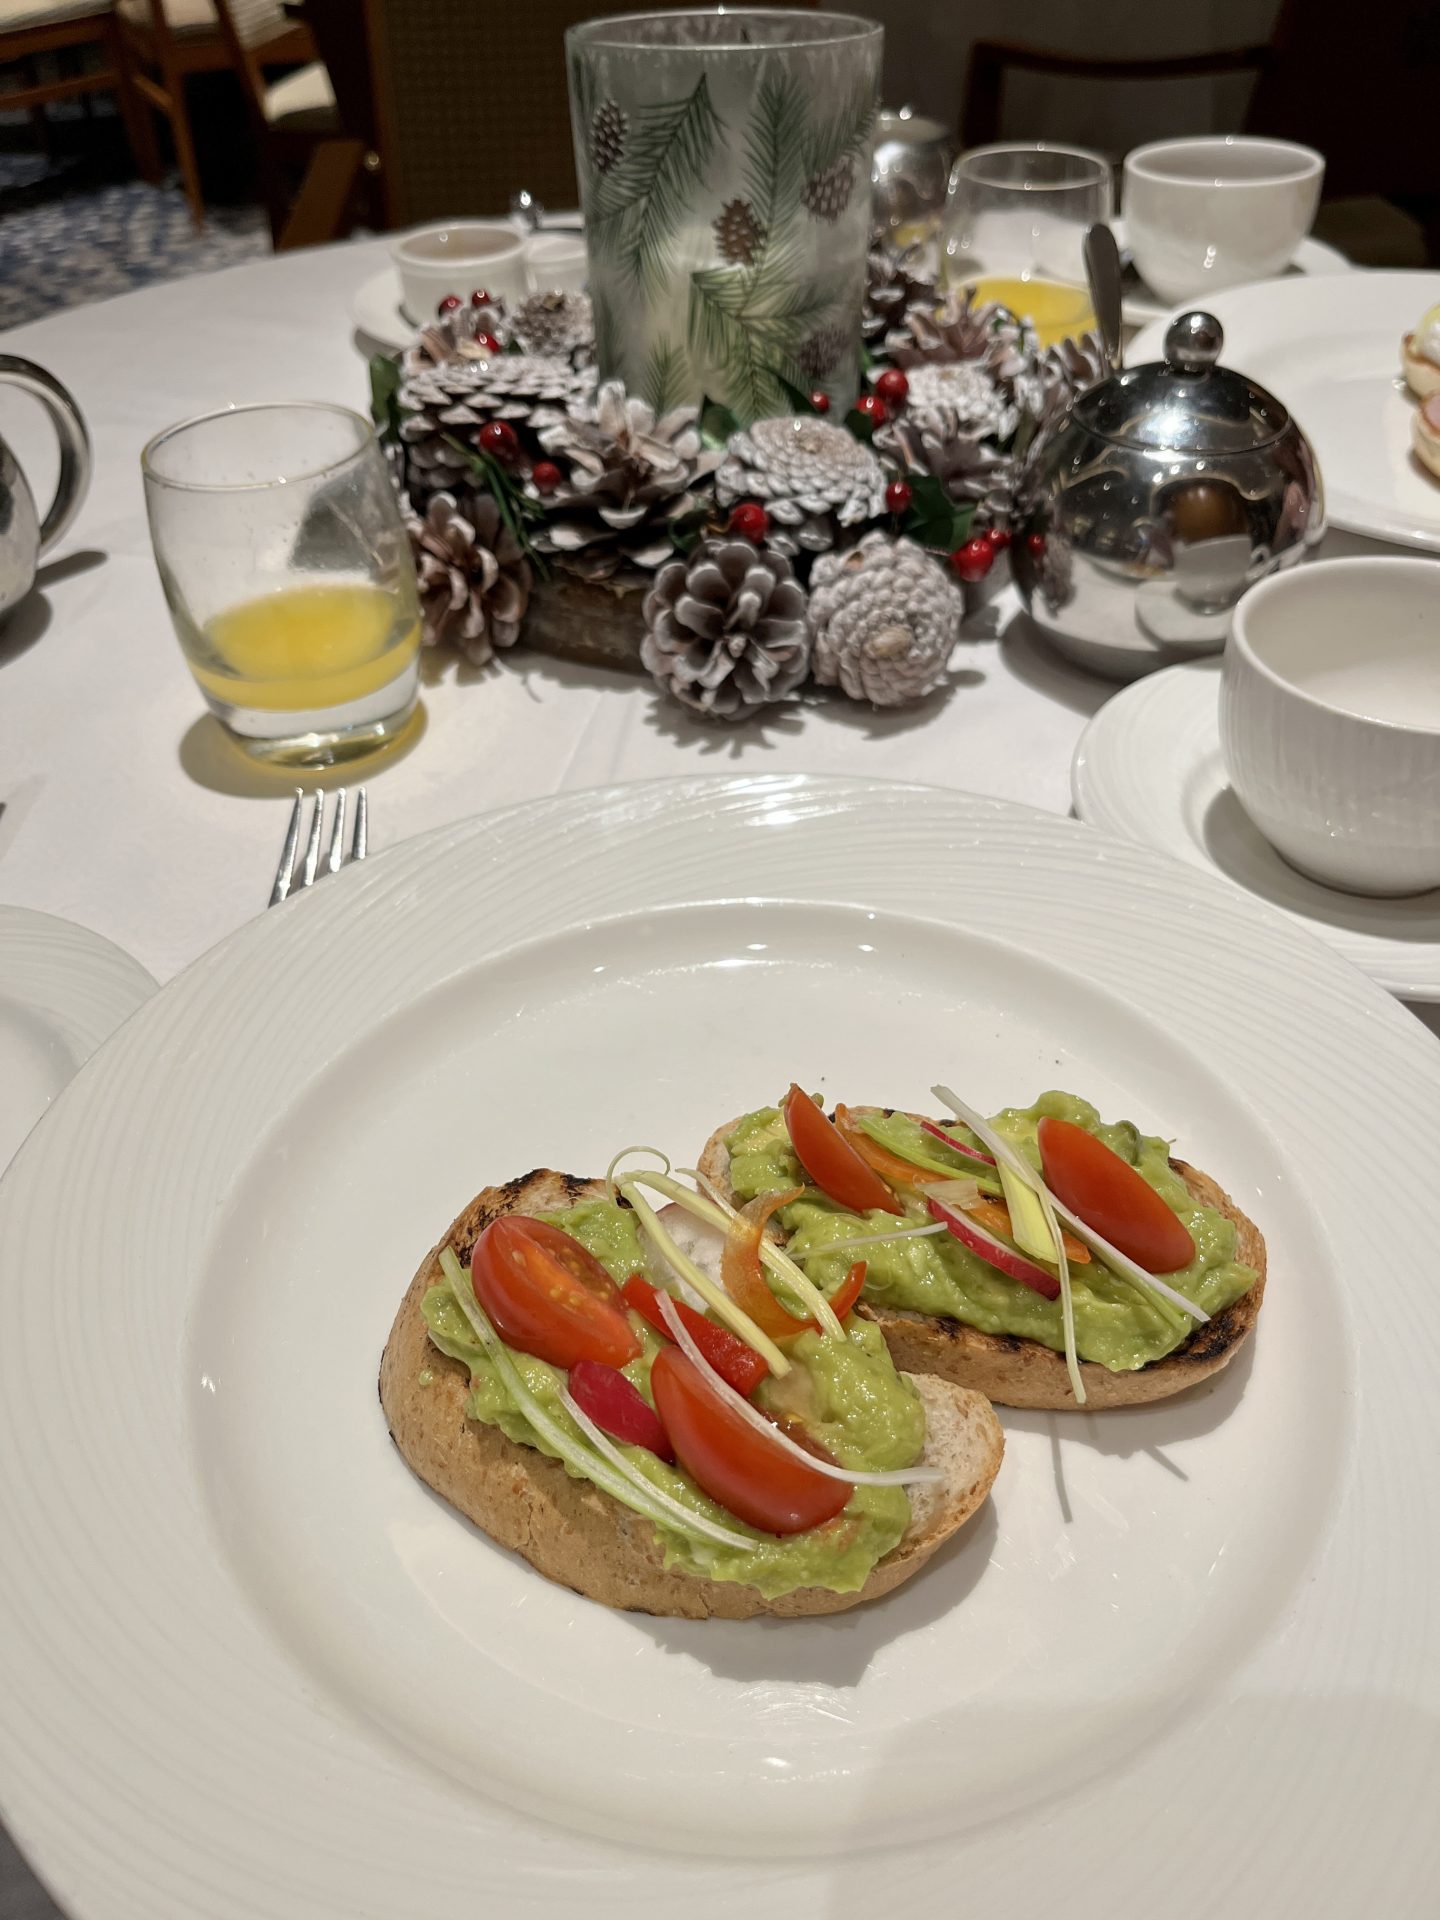 allergy-friendly avocado and tomato on breakfast muffins on a table decorated for christmas, glass of orange juice in the background